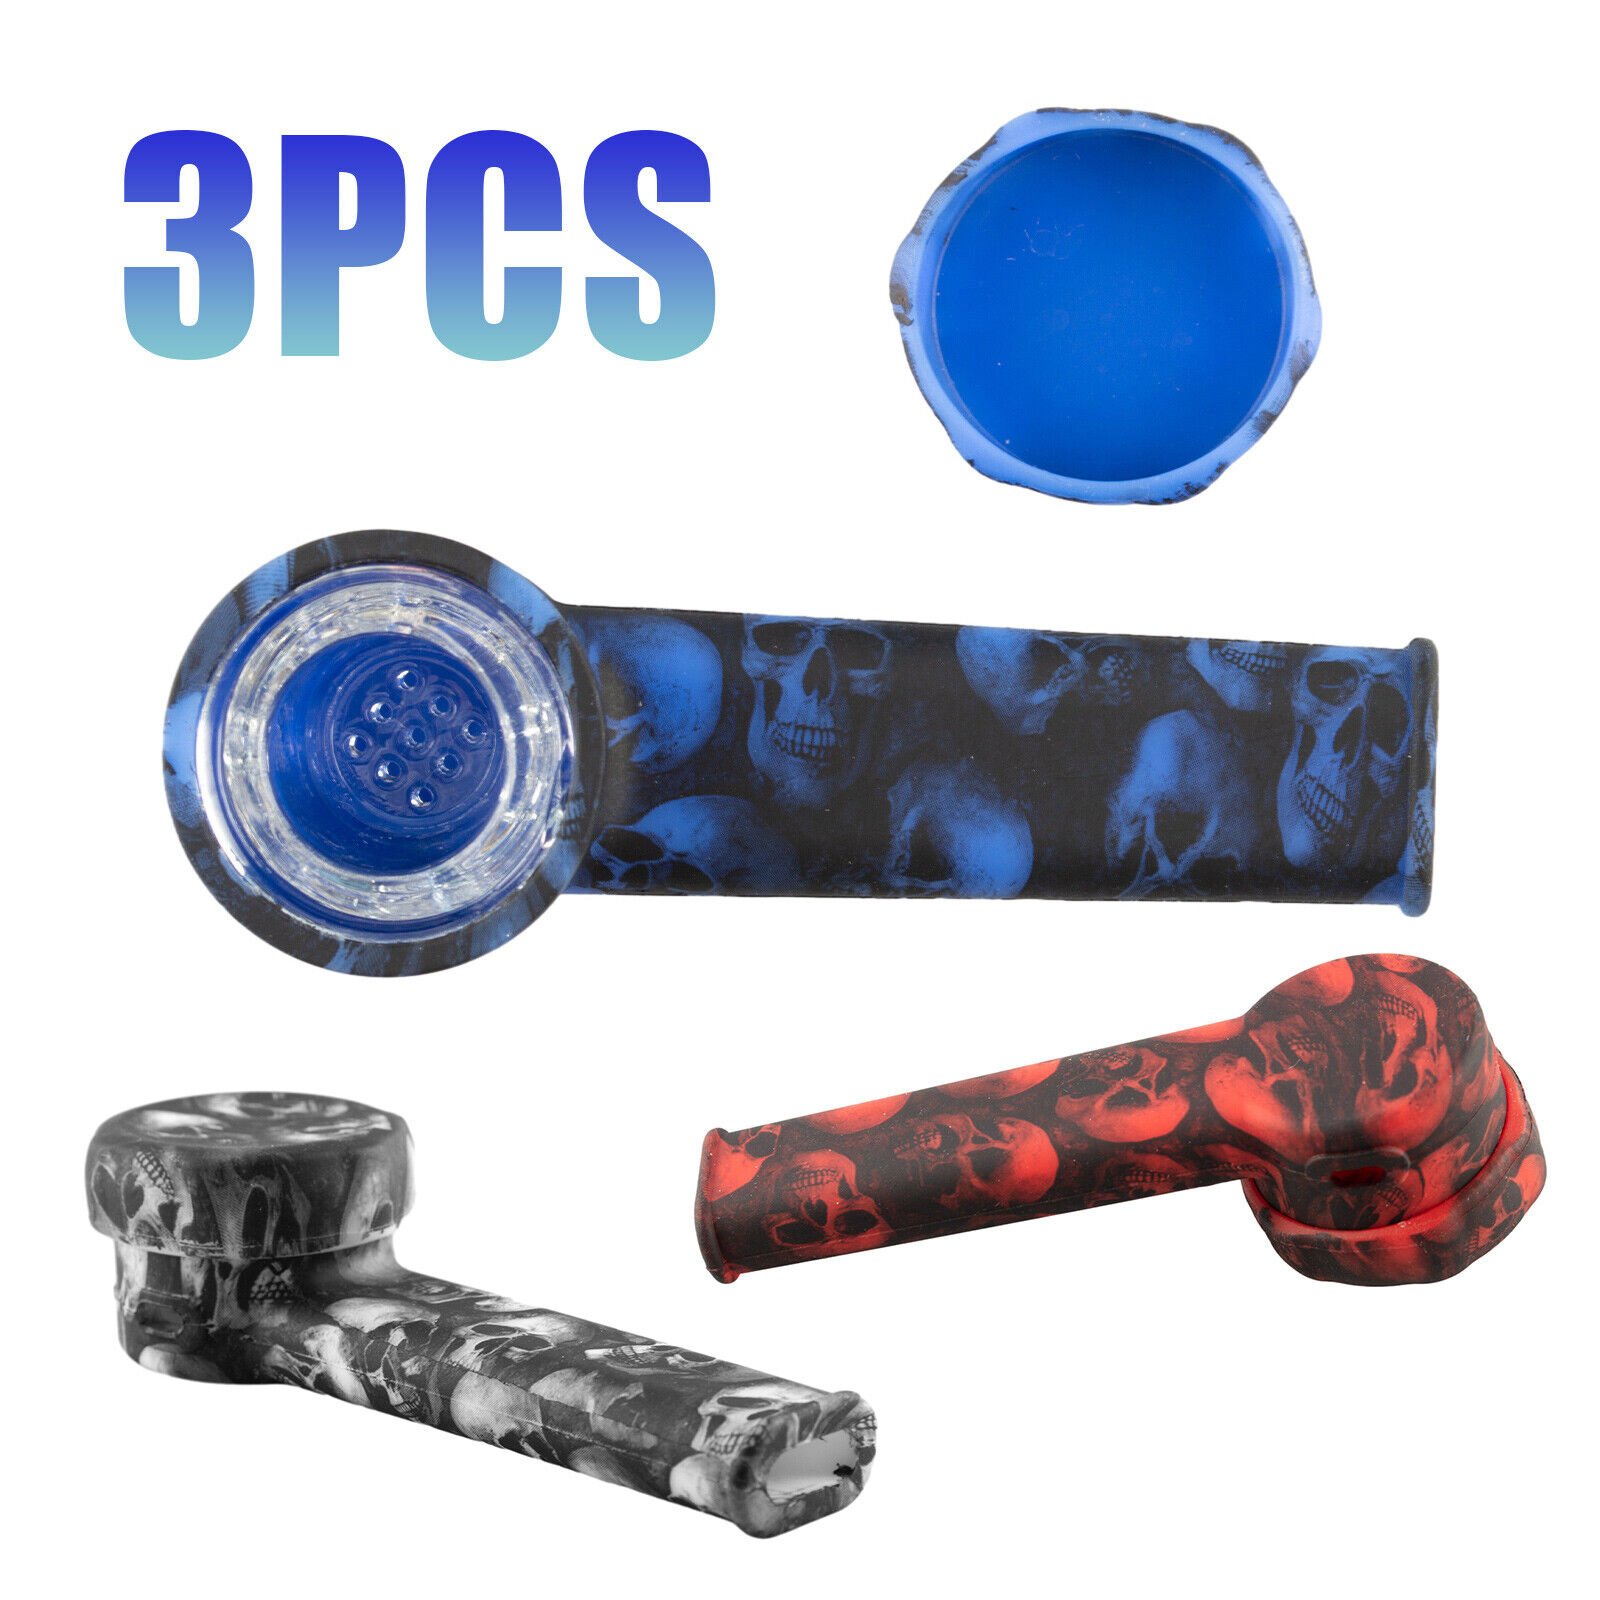 3 X Silicone Smoking Pipe with Glass Bowl US SELLER SAME DAY SHIP